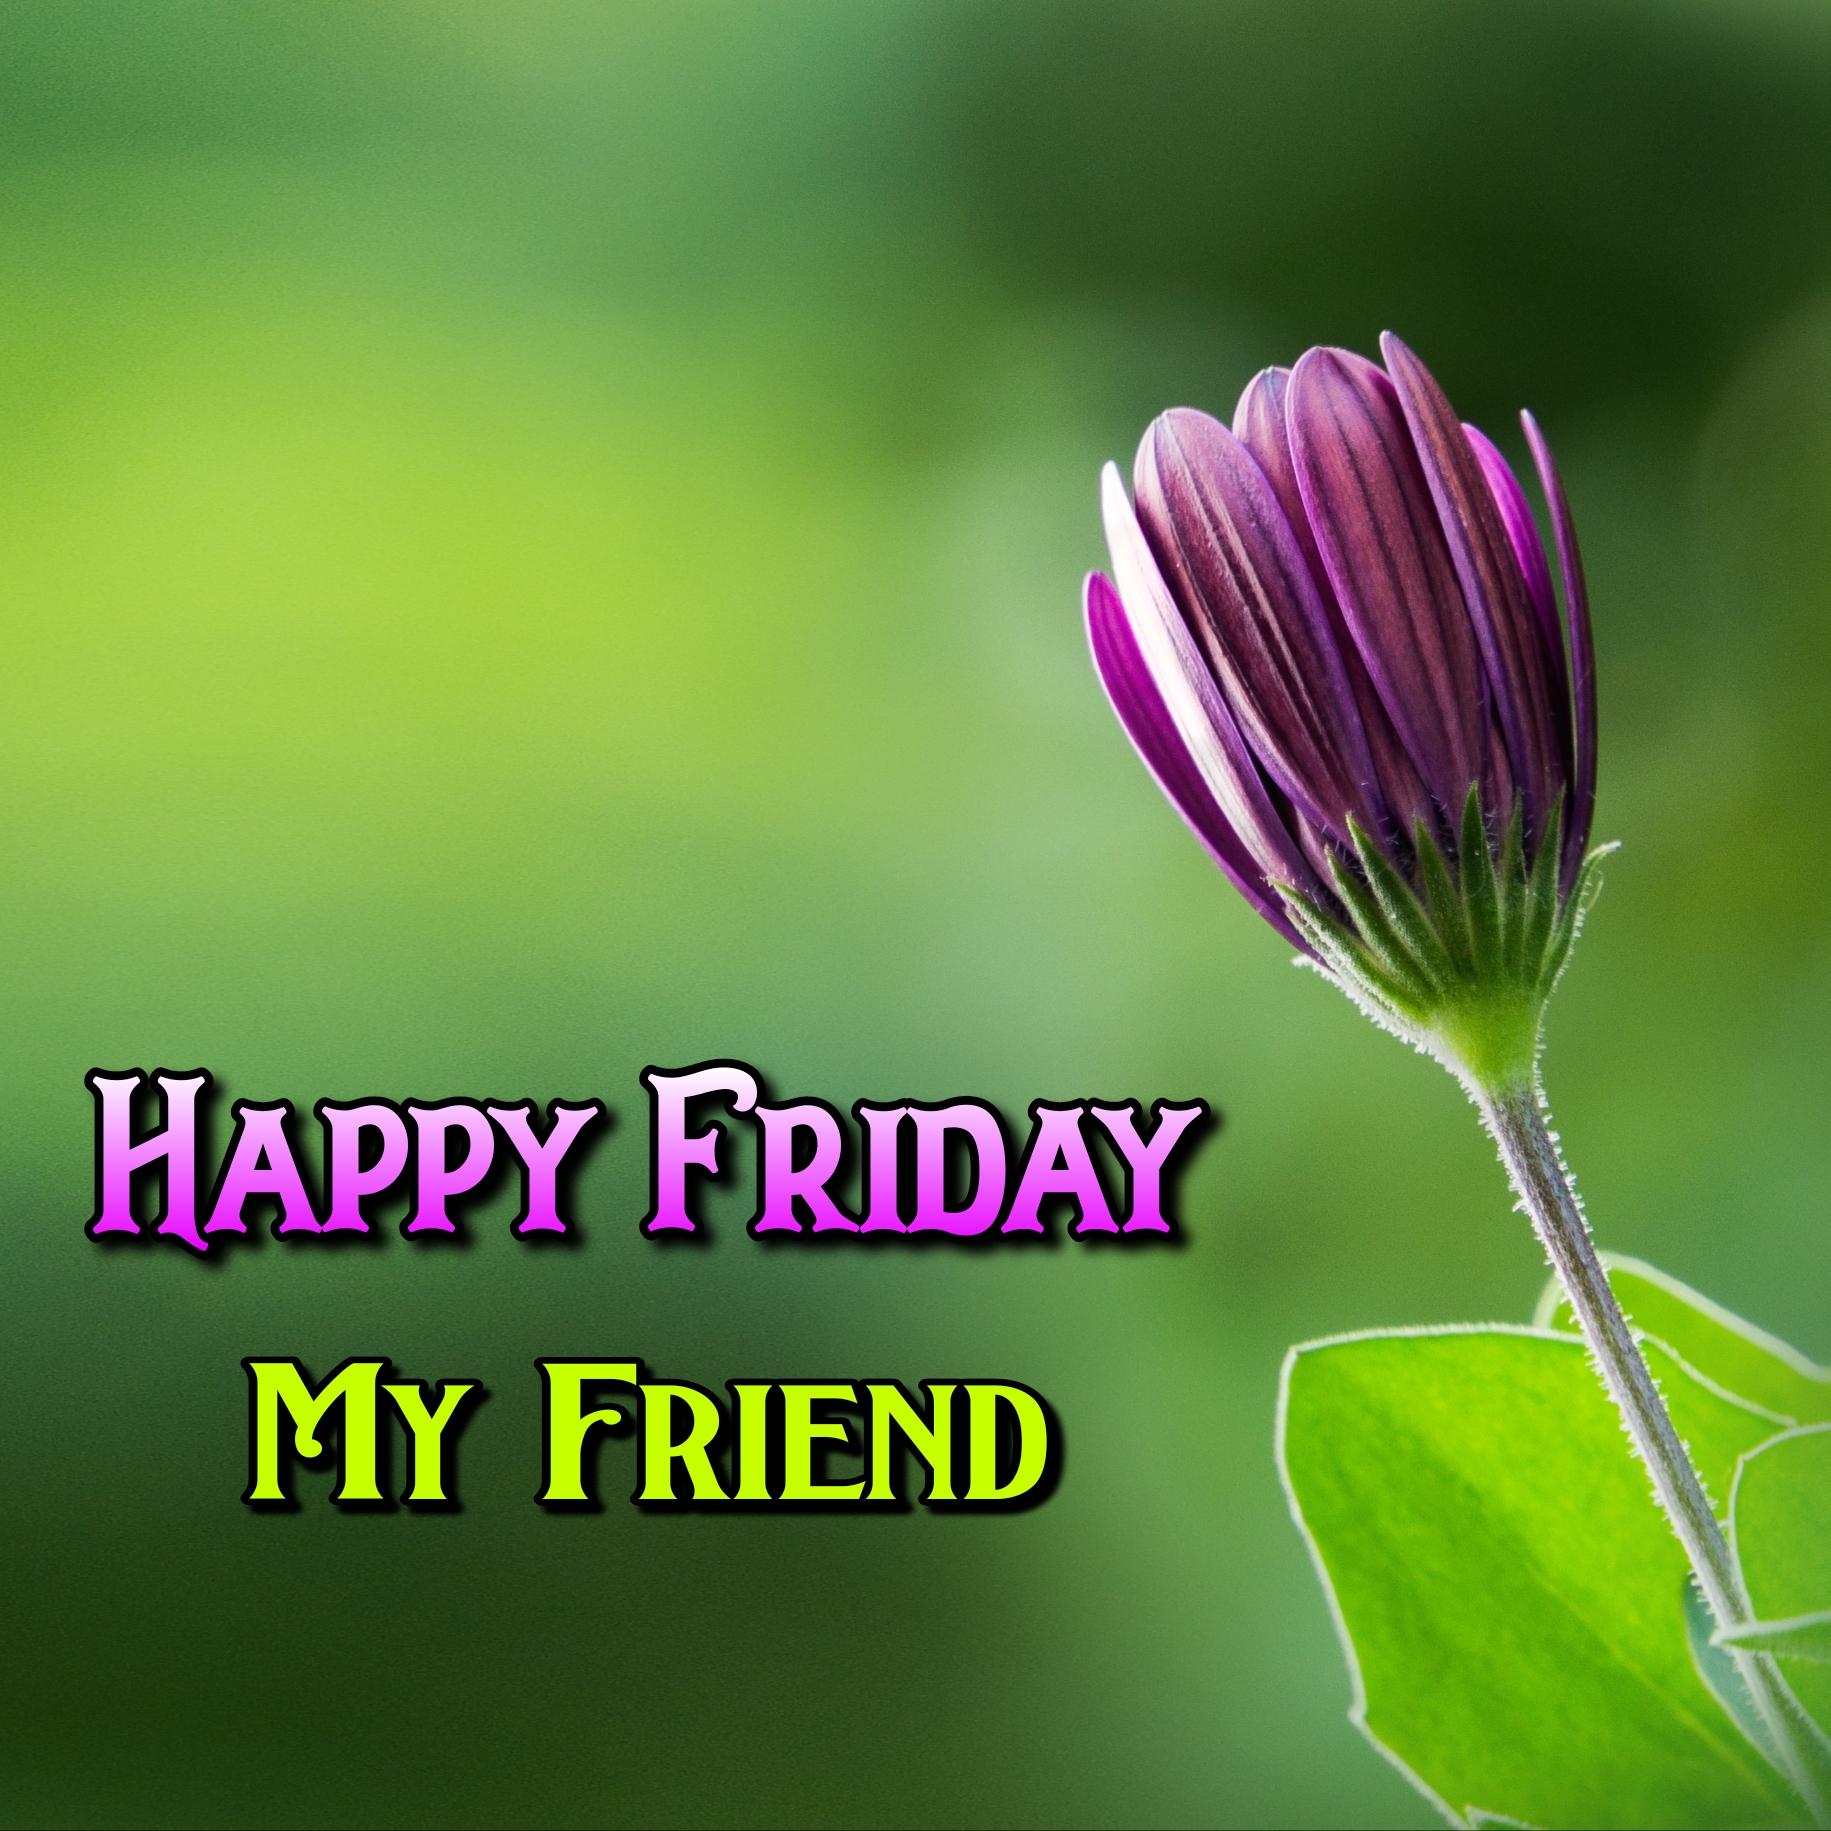 Happy Friday My Friend Images